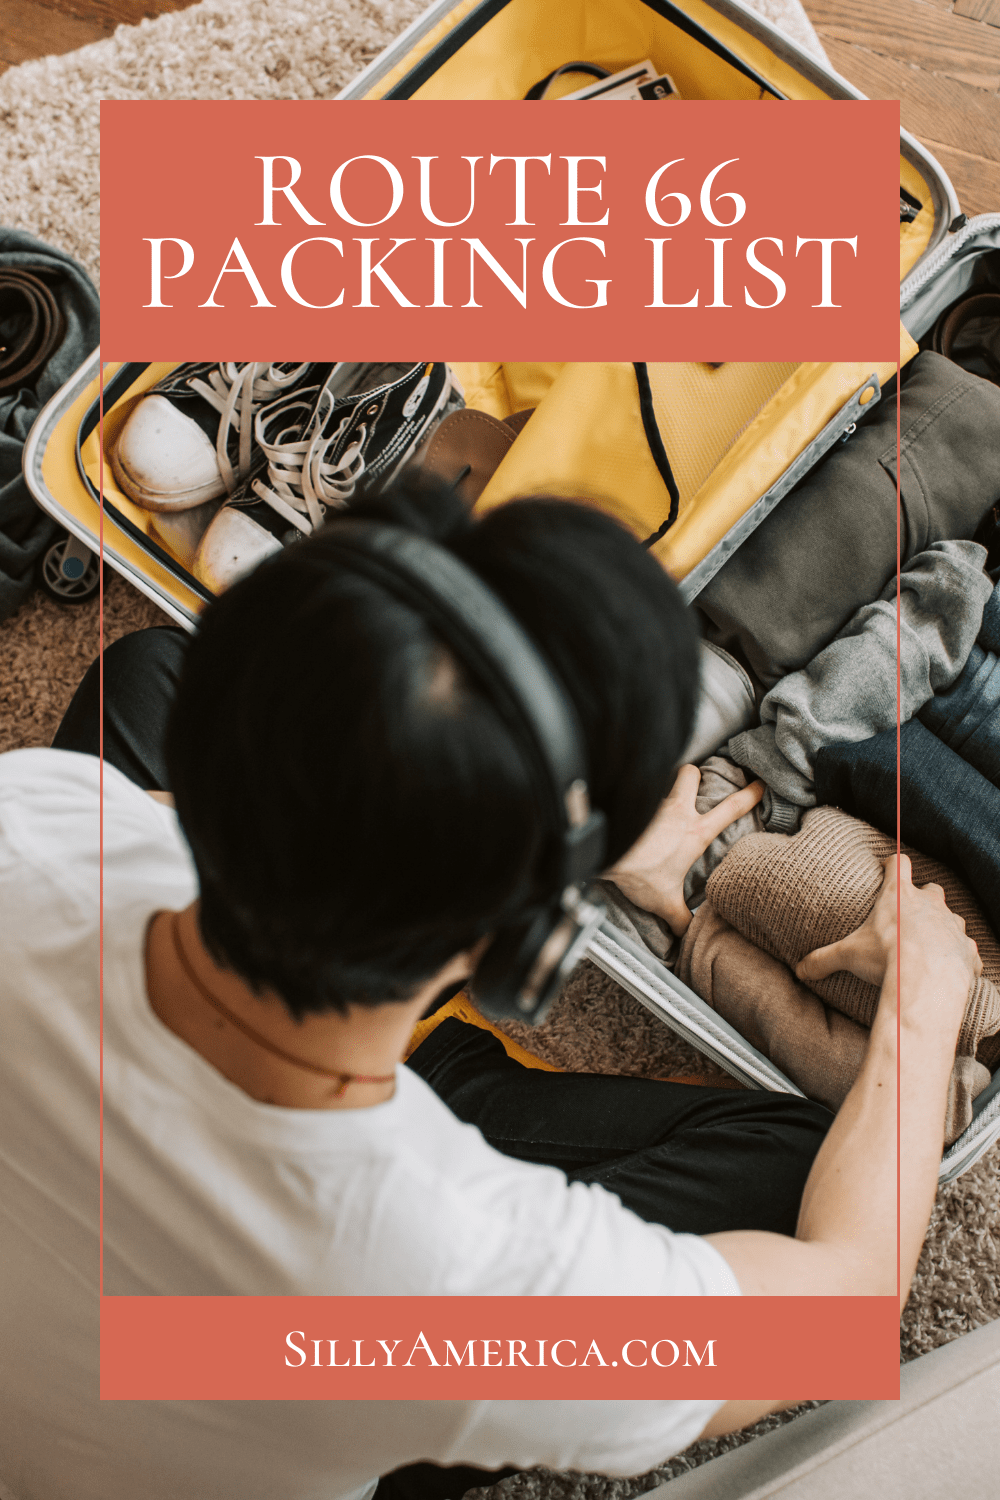 Planning a Route 66 road trip and not quite sure what to wear or what to bring? We've put together a Route 66 packing list to make it easy for you. #RoadTrip #Route66 #Route66 #PackingList #Route66PackingList